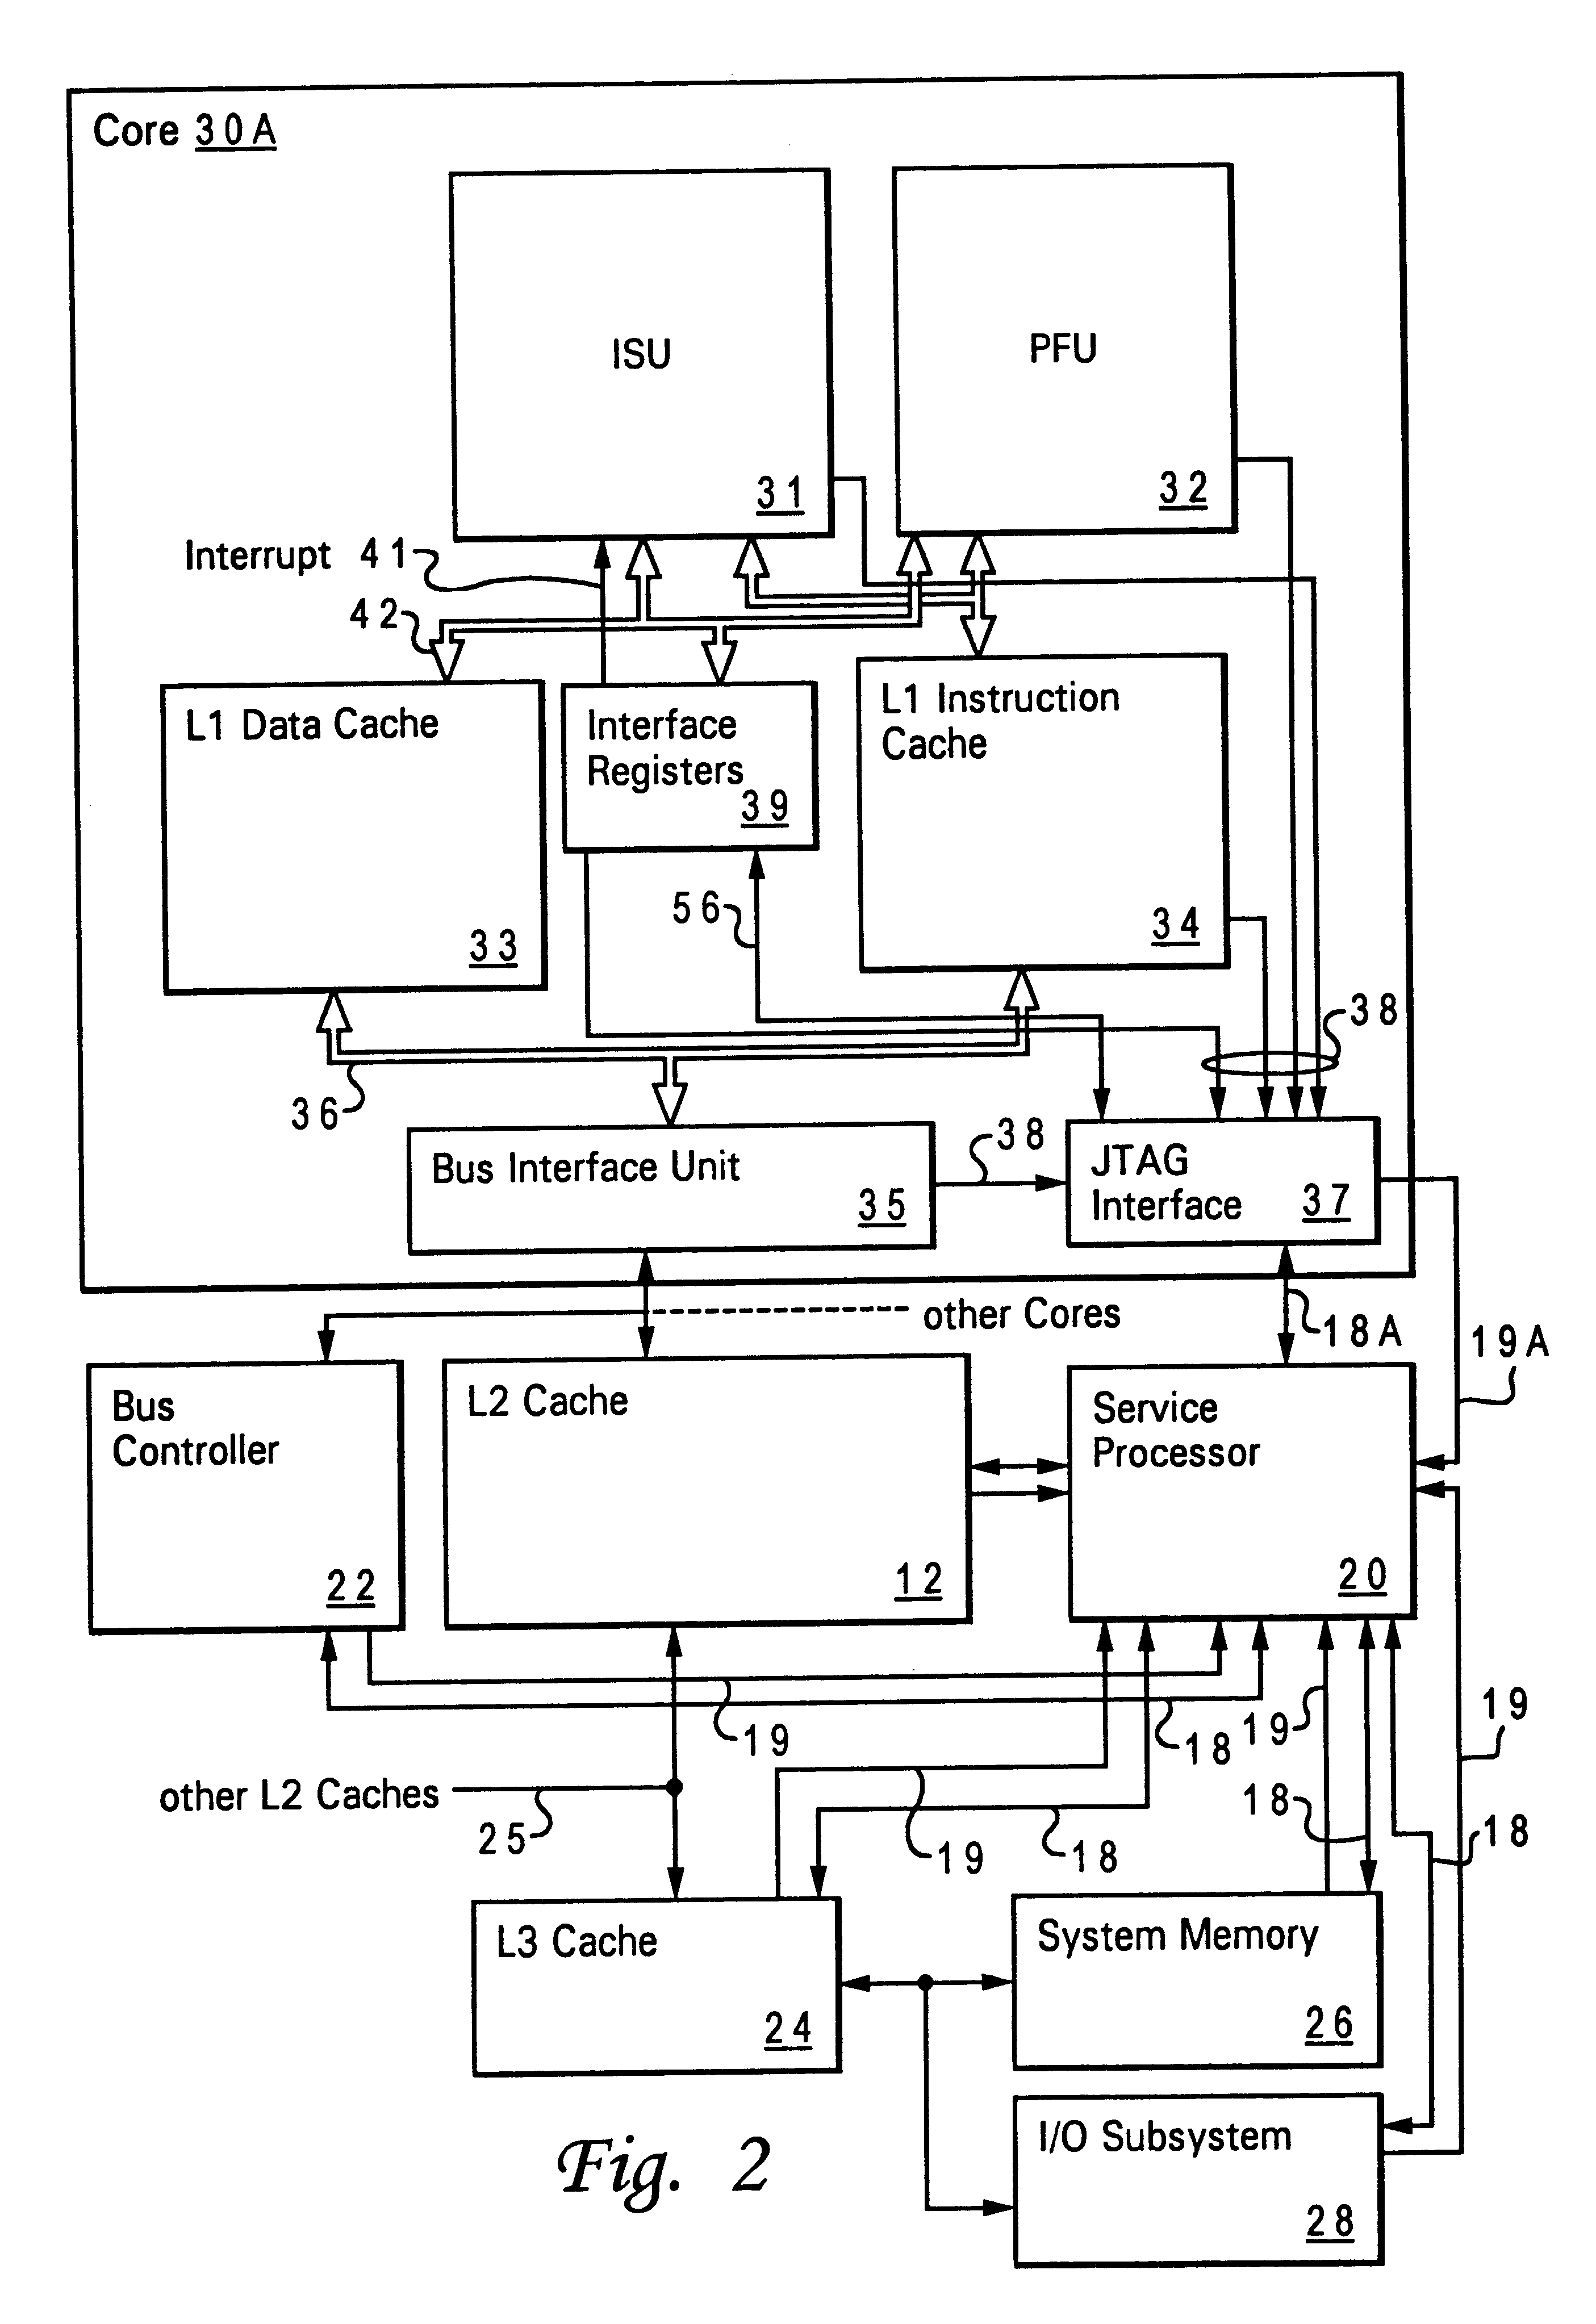 Method and apparatus for providing cooperative fault recovery between a processor and a service processor